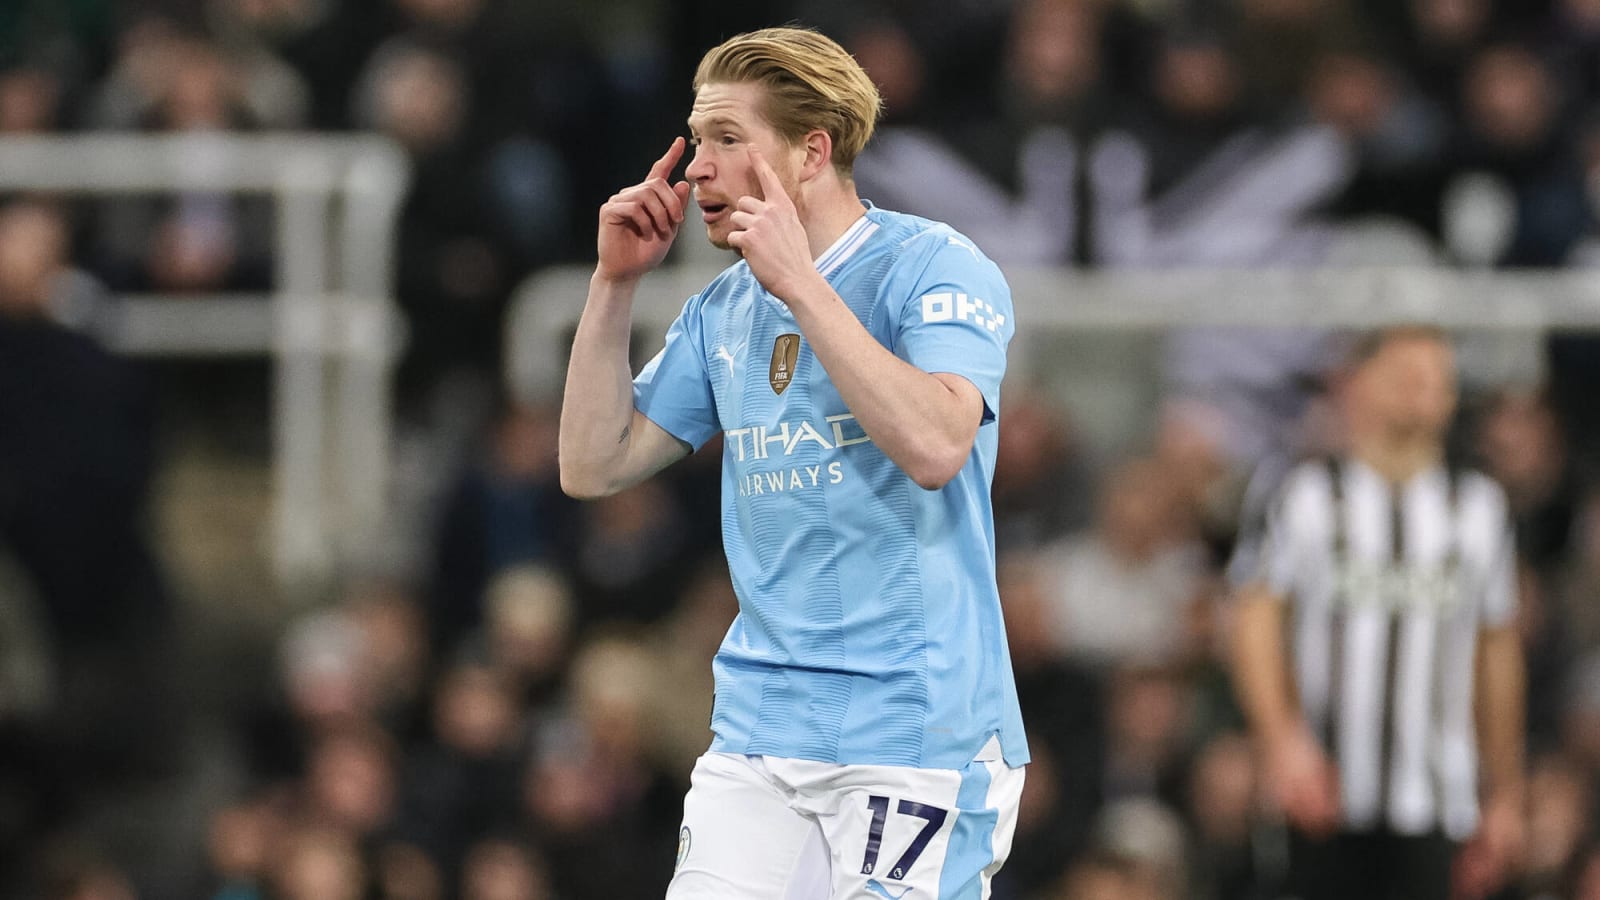 With De Bruyne back are Man City now certain to deny Arsenal any chance of the title?